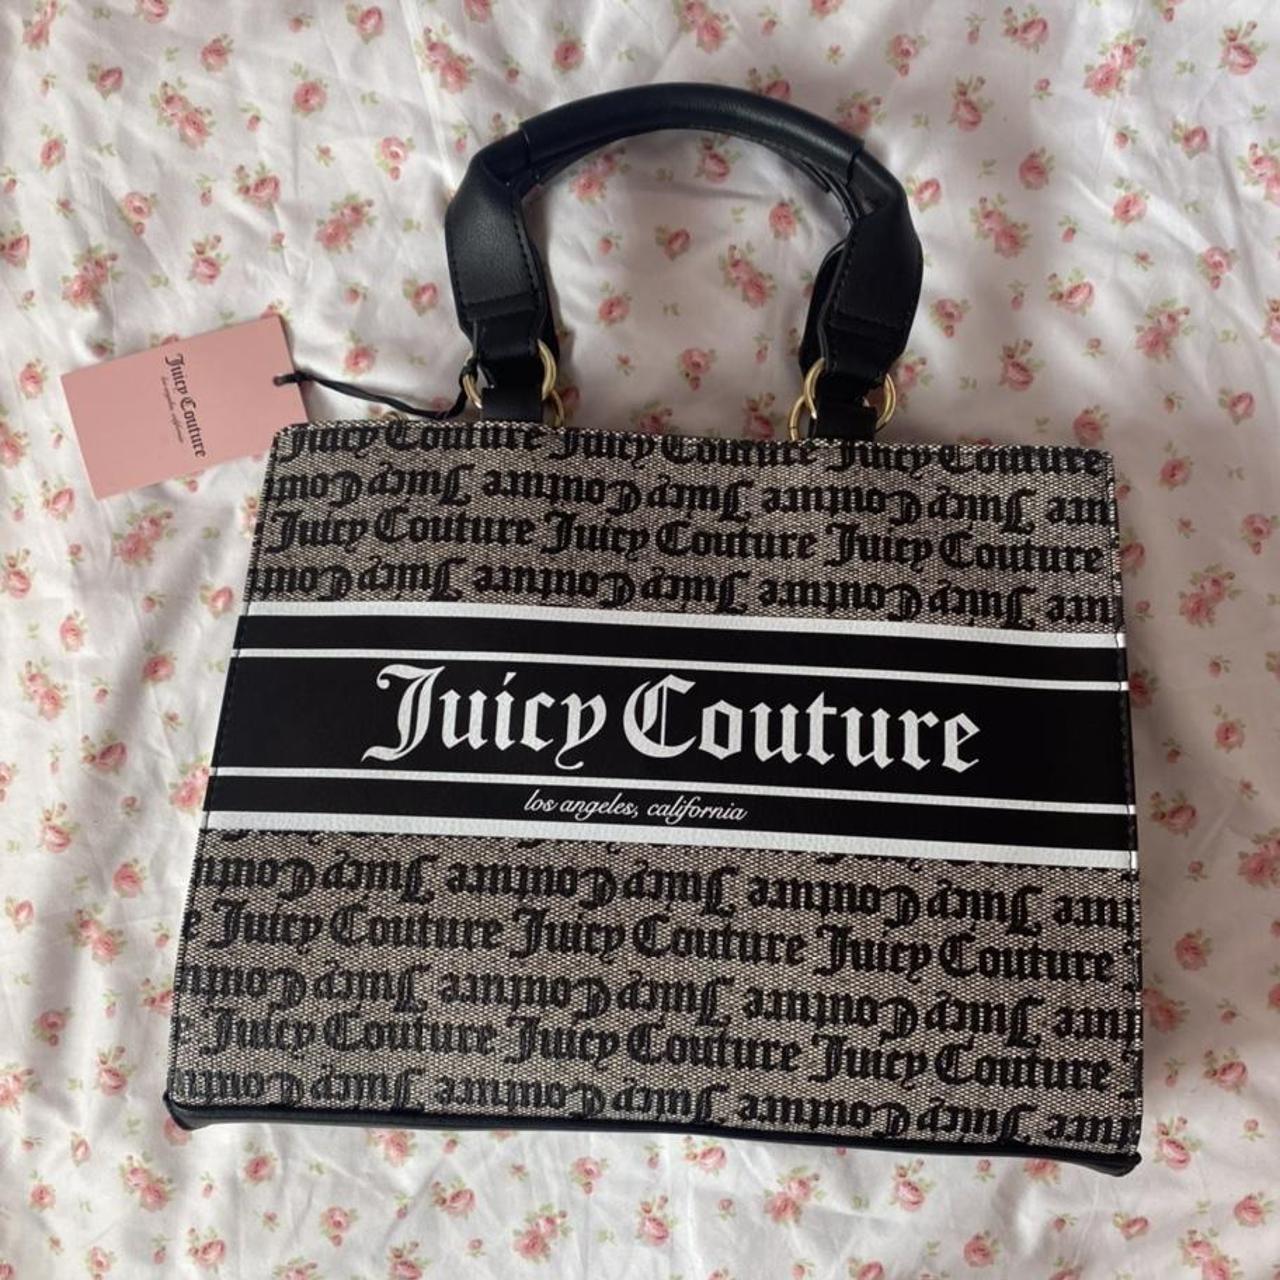 Juicy Couture Women's Grey and Black Bag